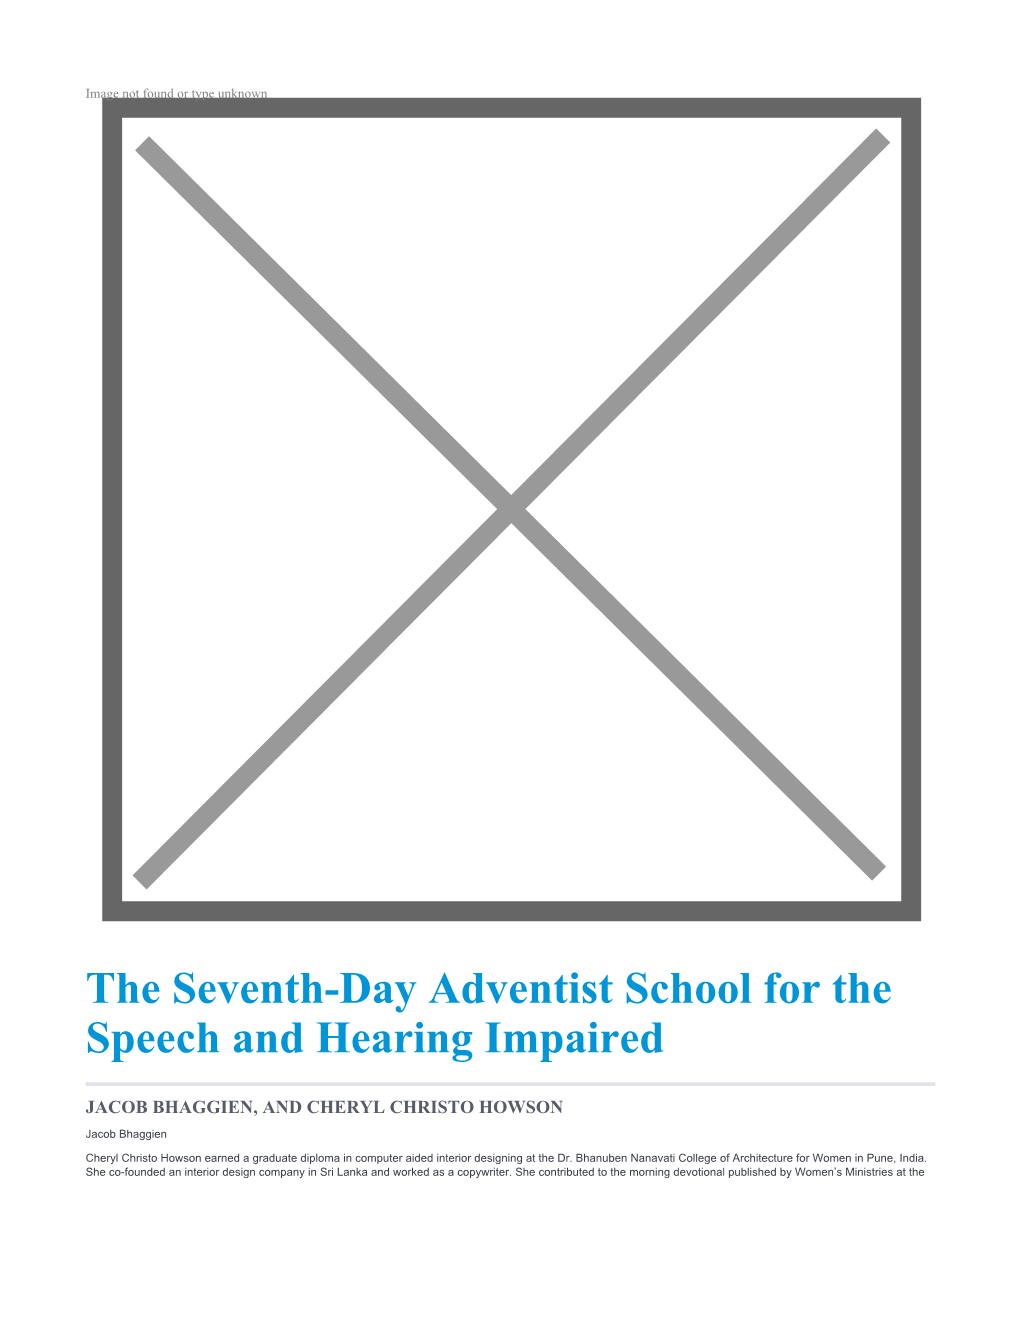 The Seventh-Day Adventist School for the Speech and Hearing Impaired